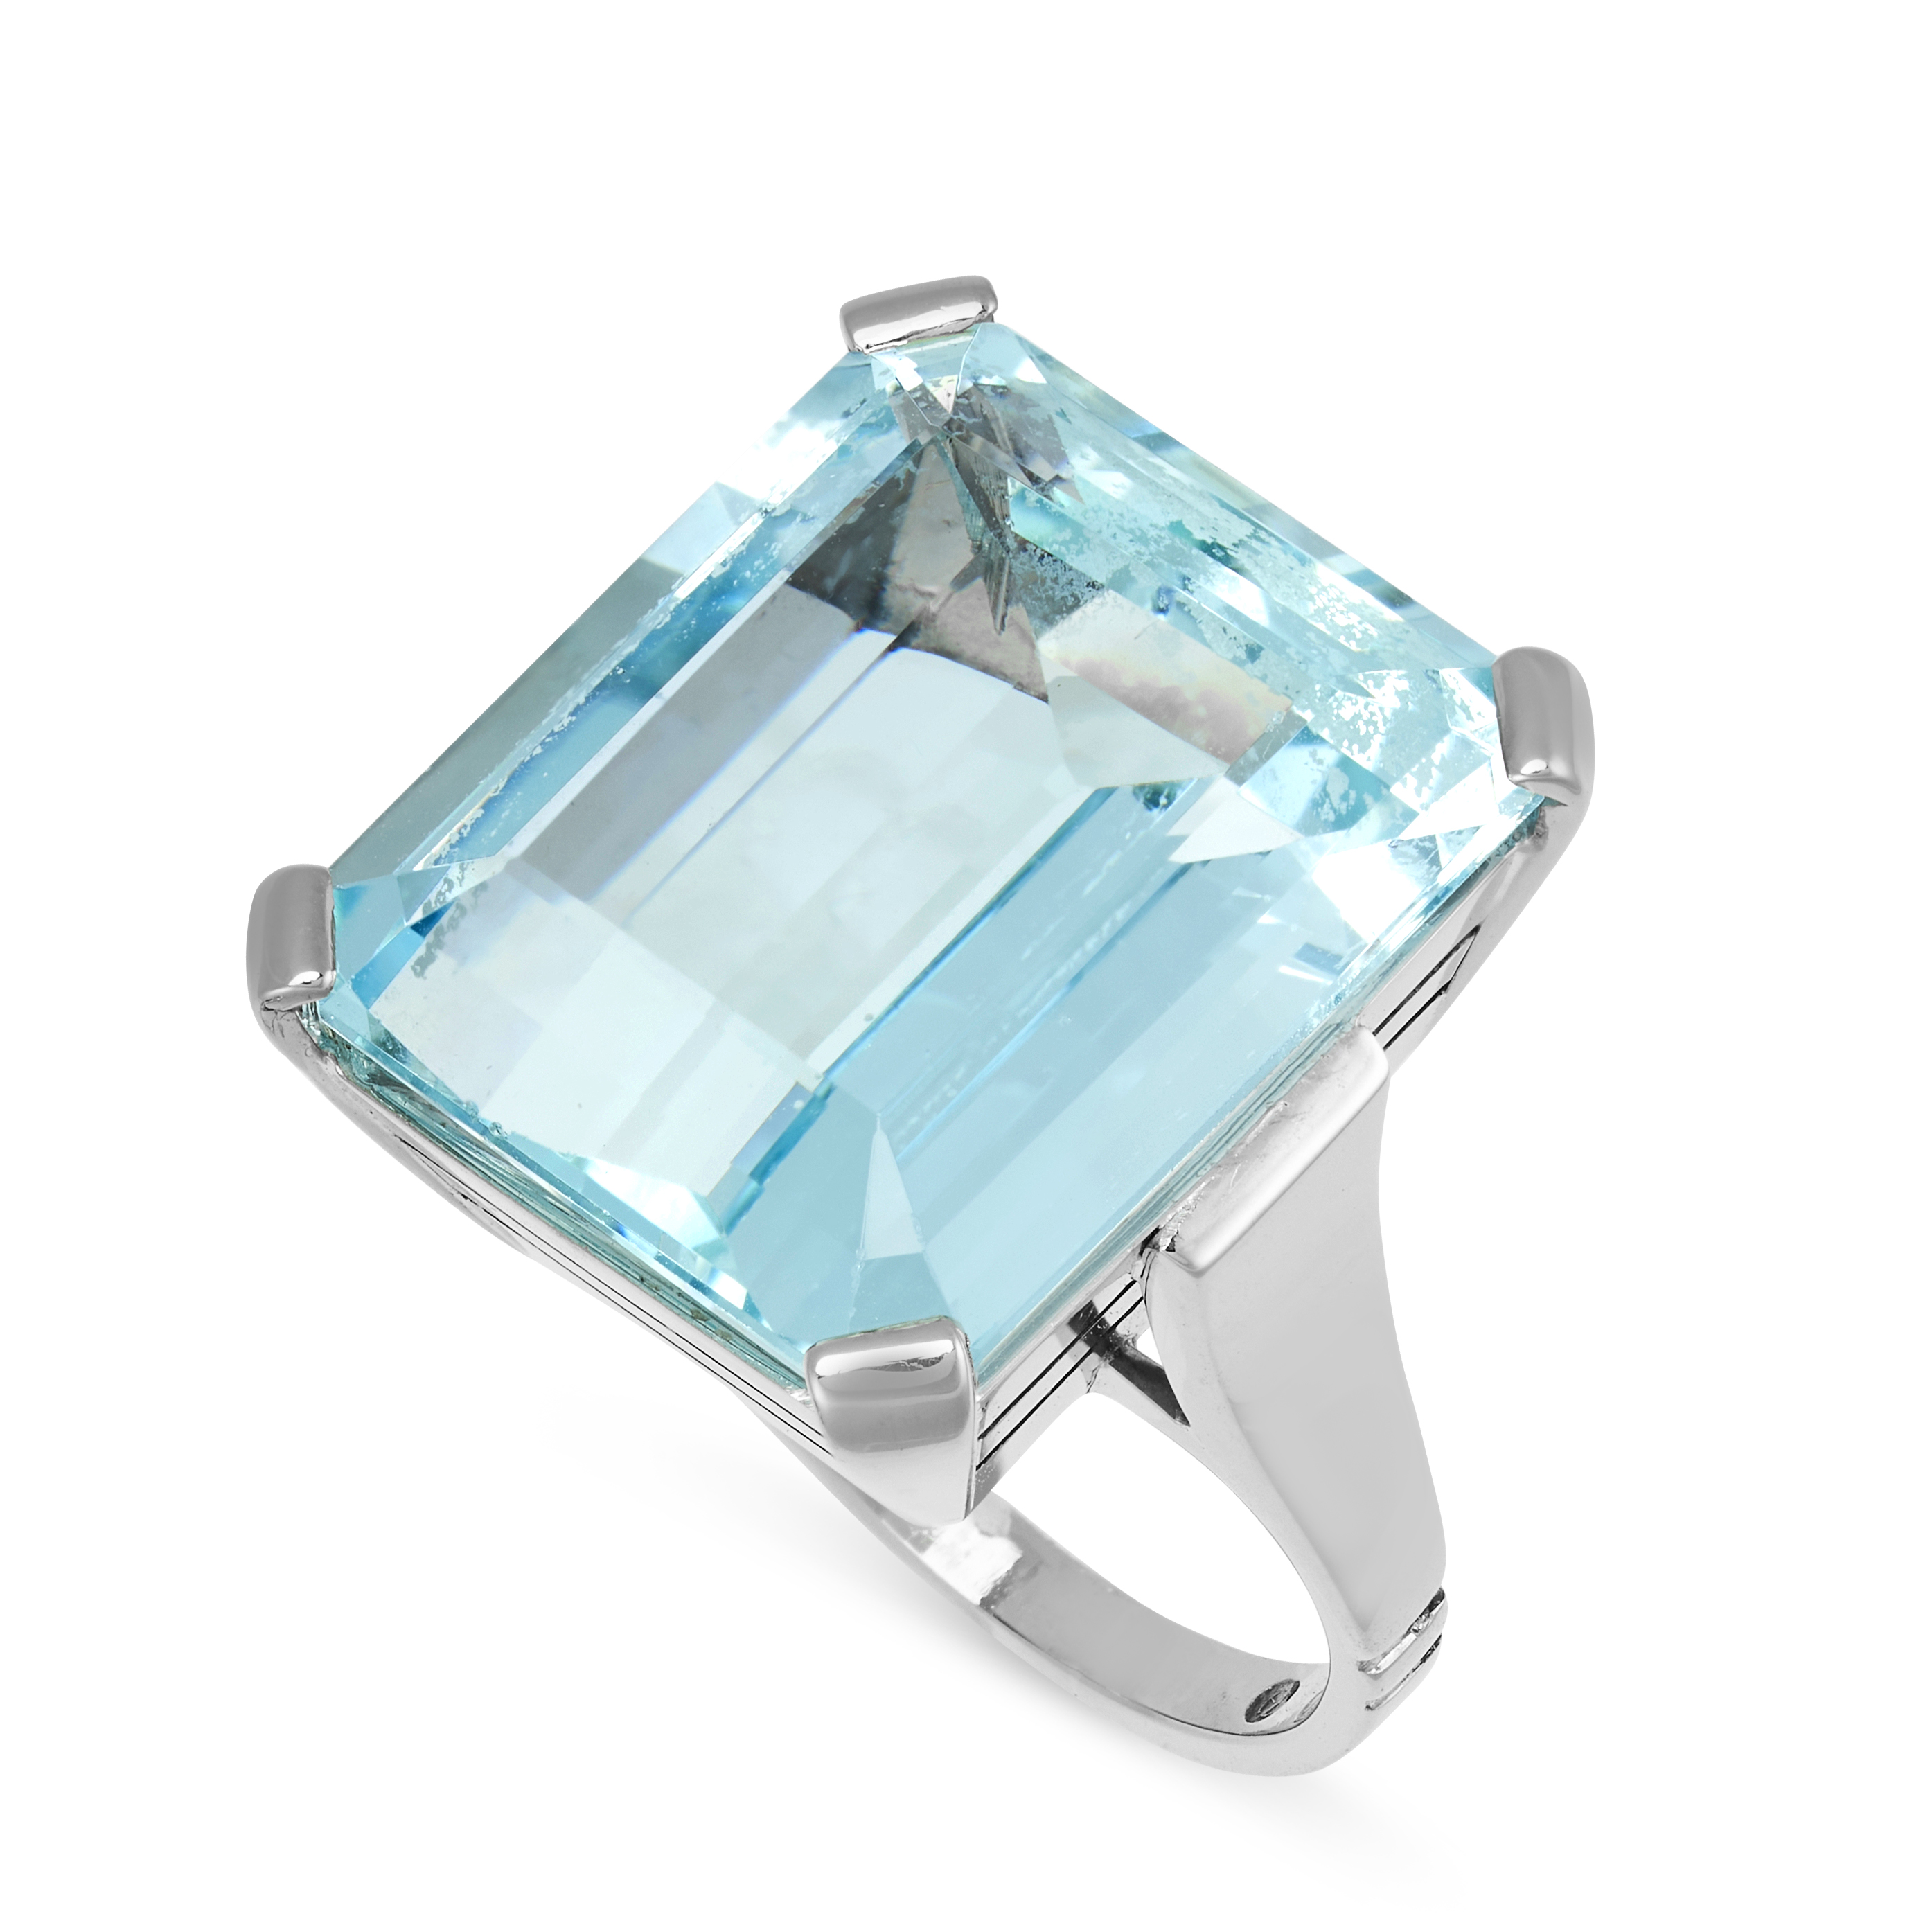 AN AQUAMARINE RING set with an emerald cut aquamarine weighing 19.57 carats, stamped 750, size L / - Image 2 of 2